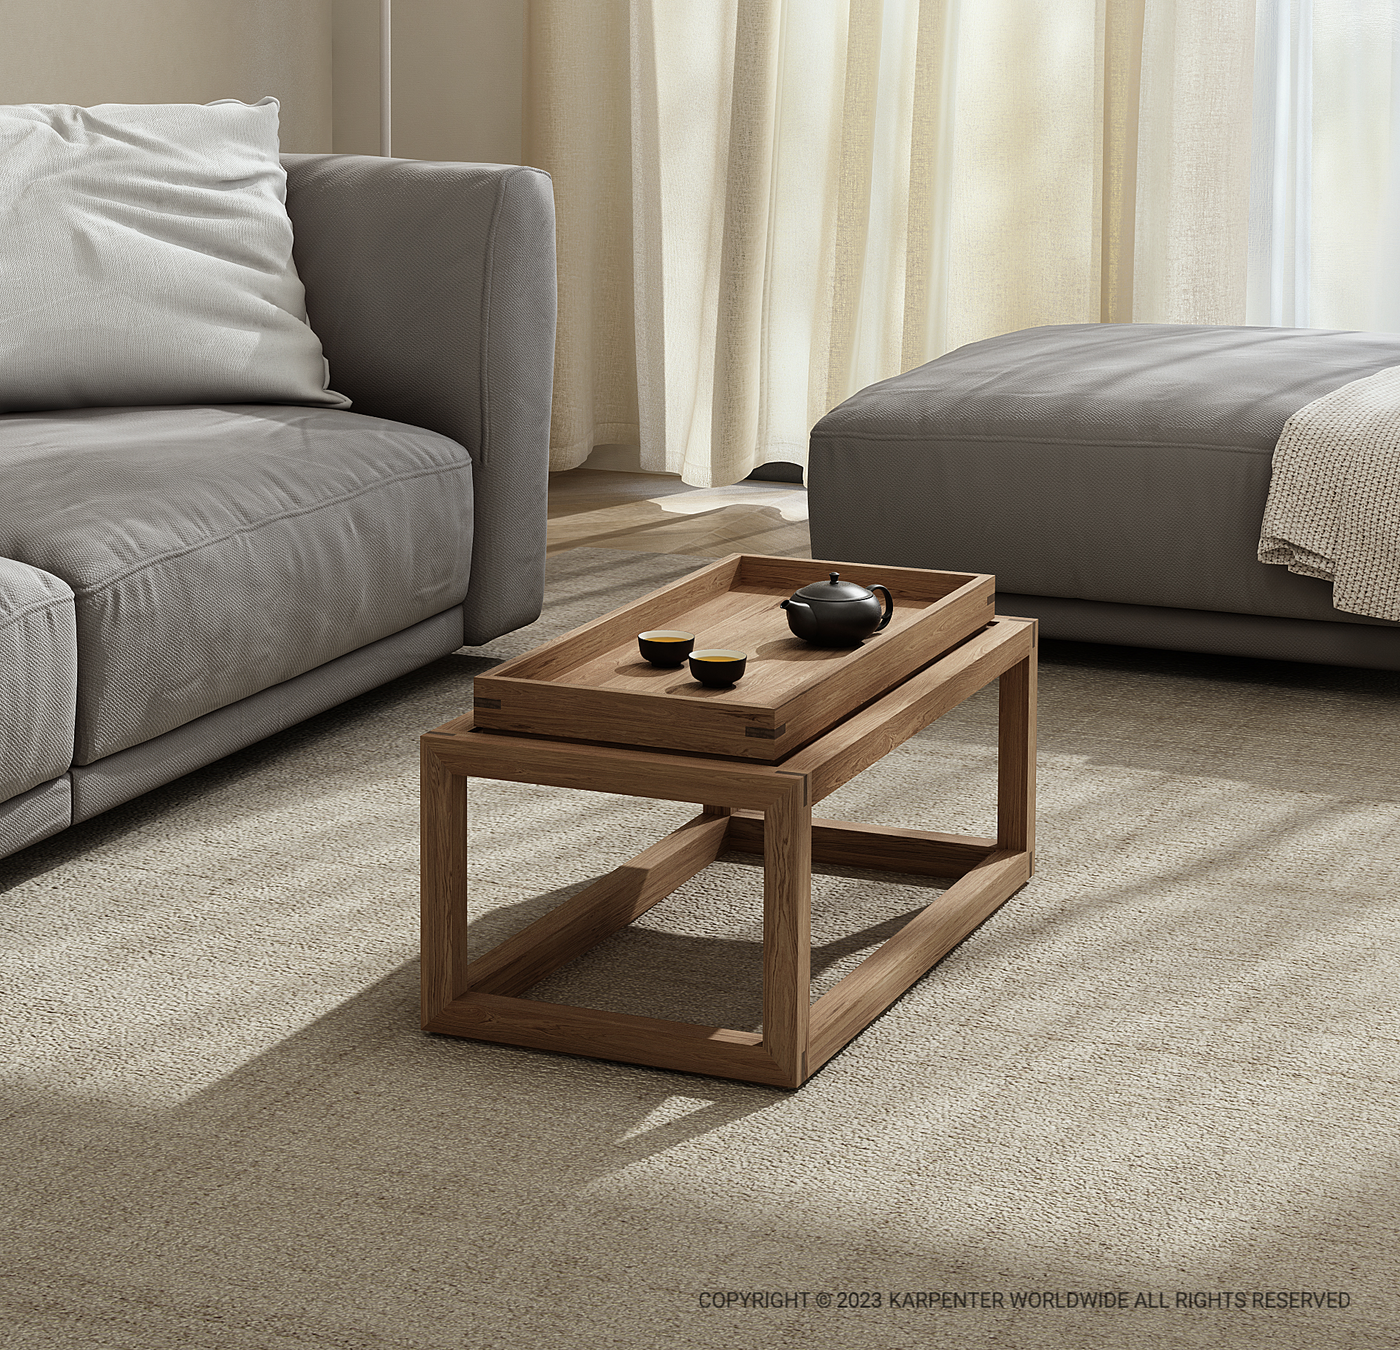 Up and Down Small Coffee Table - European Oak